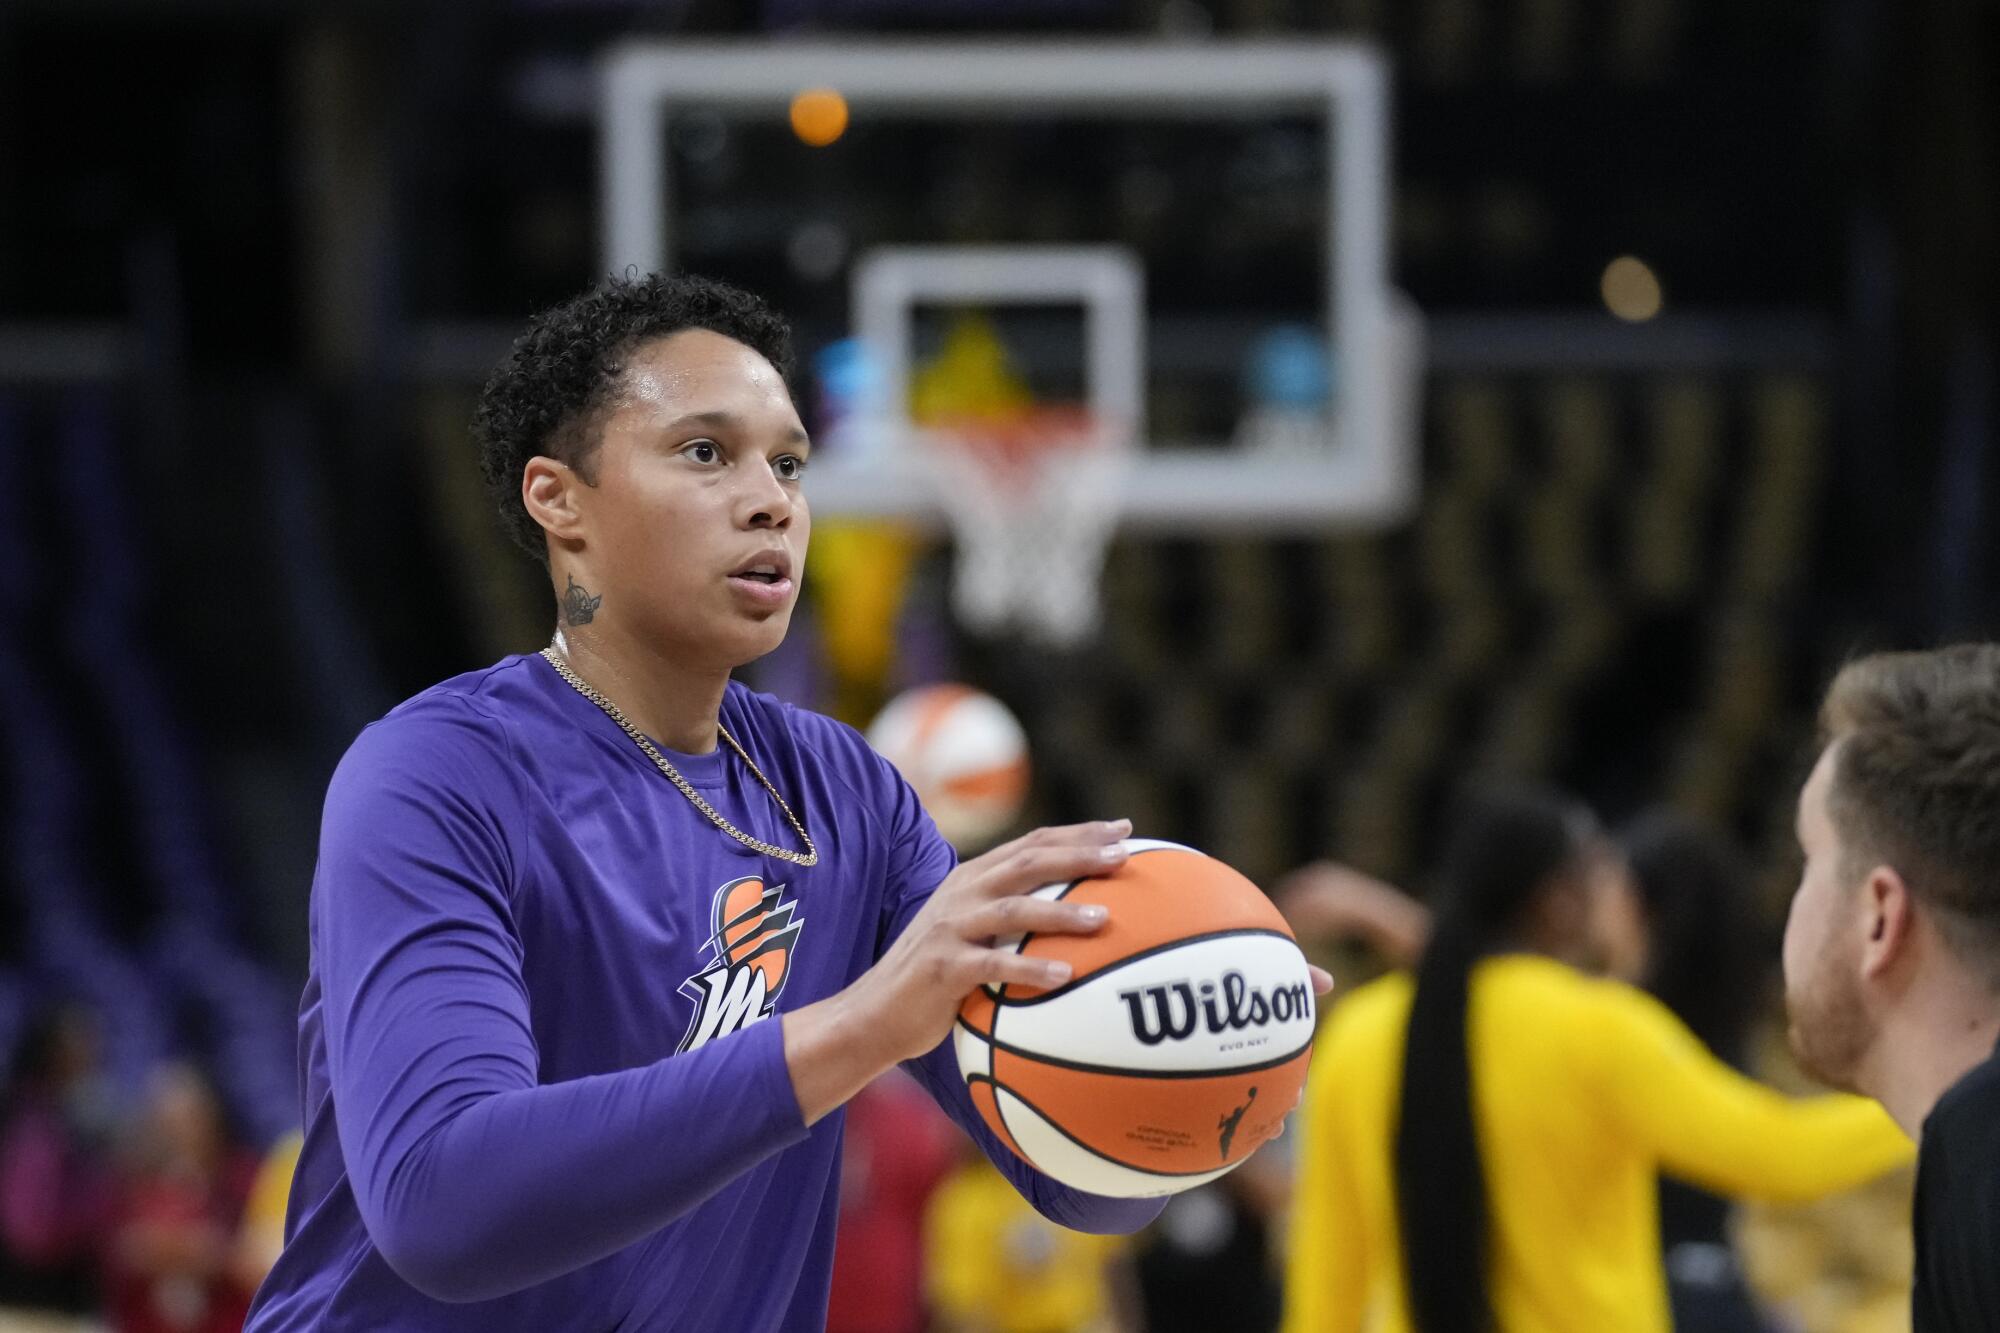 Phoenix Mercury center Brittney Griner prepares to shoot the ball while warming up before facing the Sparks.